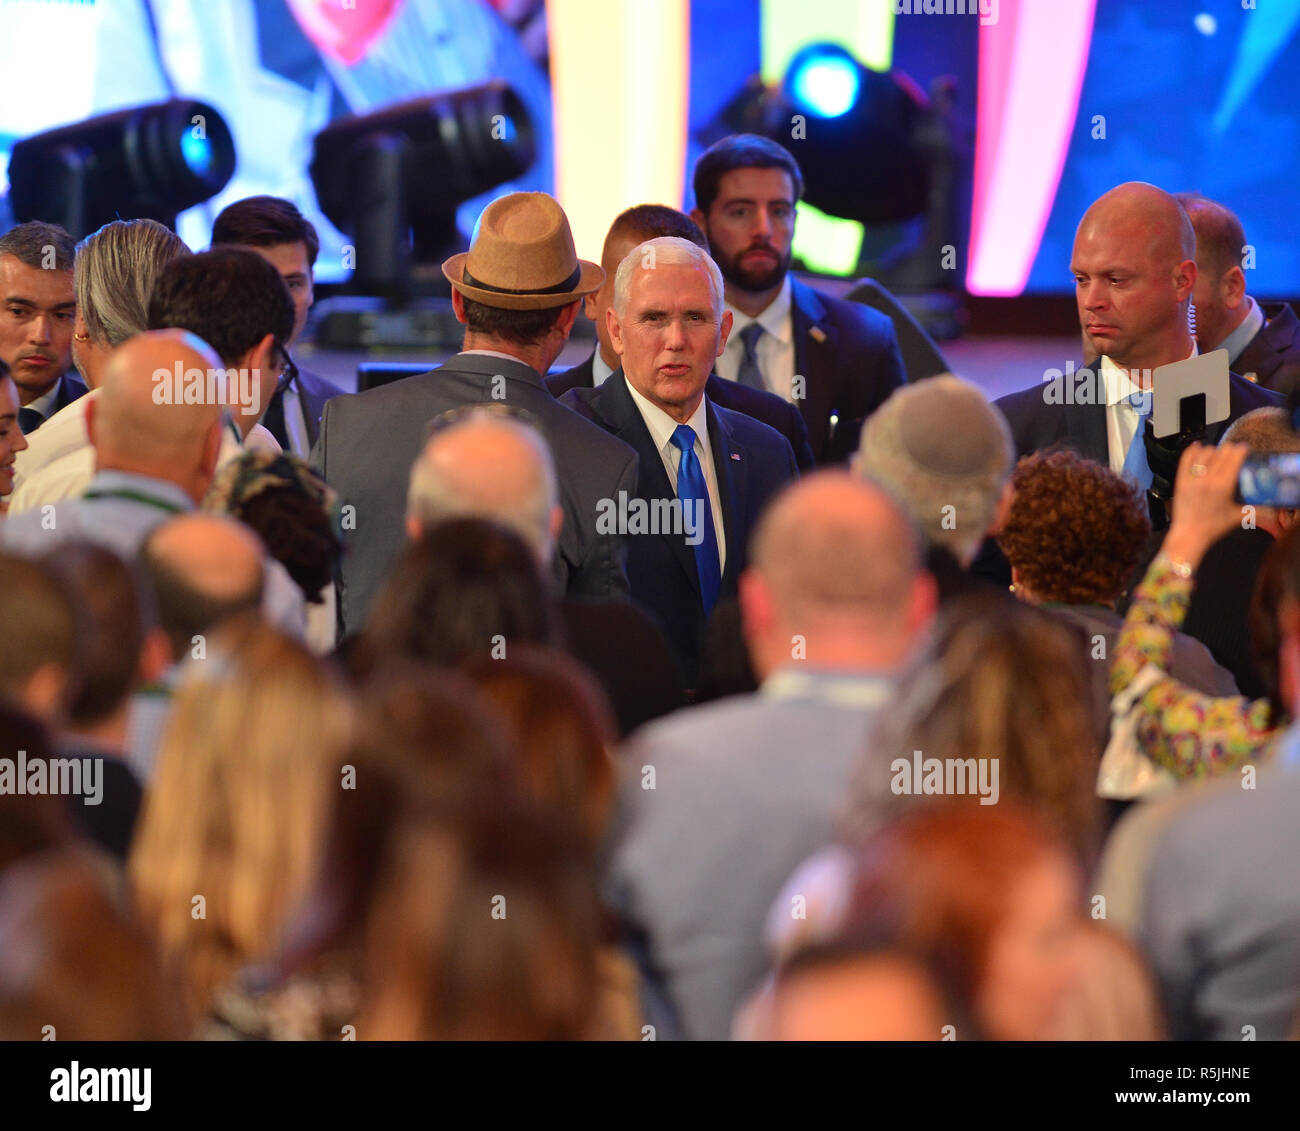 Hollywood, Florida,  USA. 30th November 2018. U.S.A. Vice President's Mike Pence attends and speak at the 5th Israeli-American Council National Conference at the Westin Diplomat resort Hollywood on November 30, 2018 in Hollywood, Florida. Credit: Mpi10/Media Punch/Alamy Live News Stock Photo